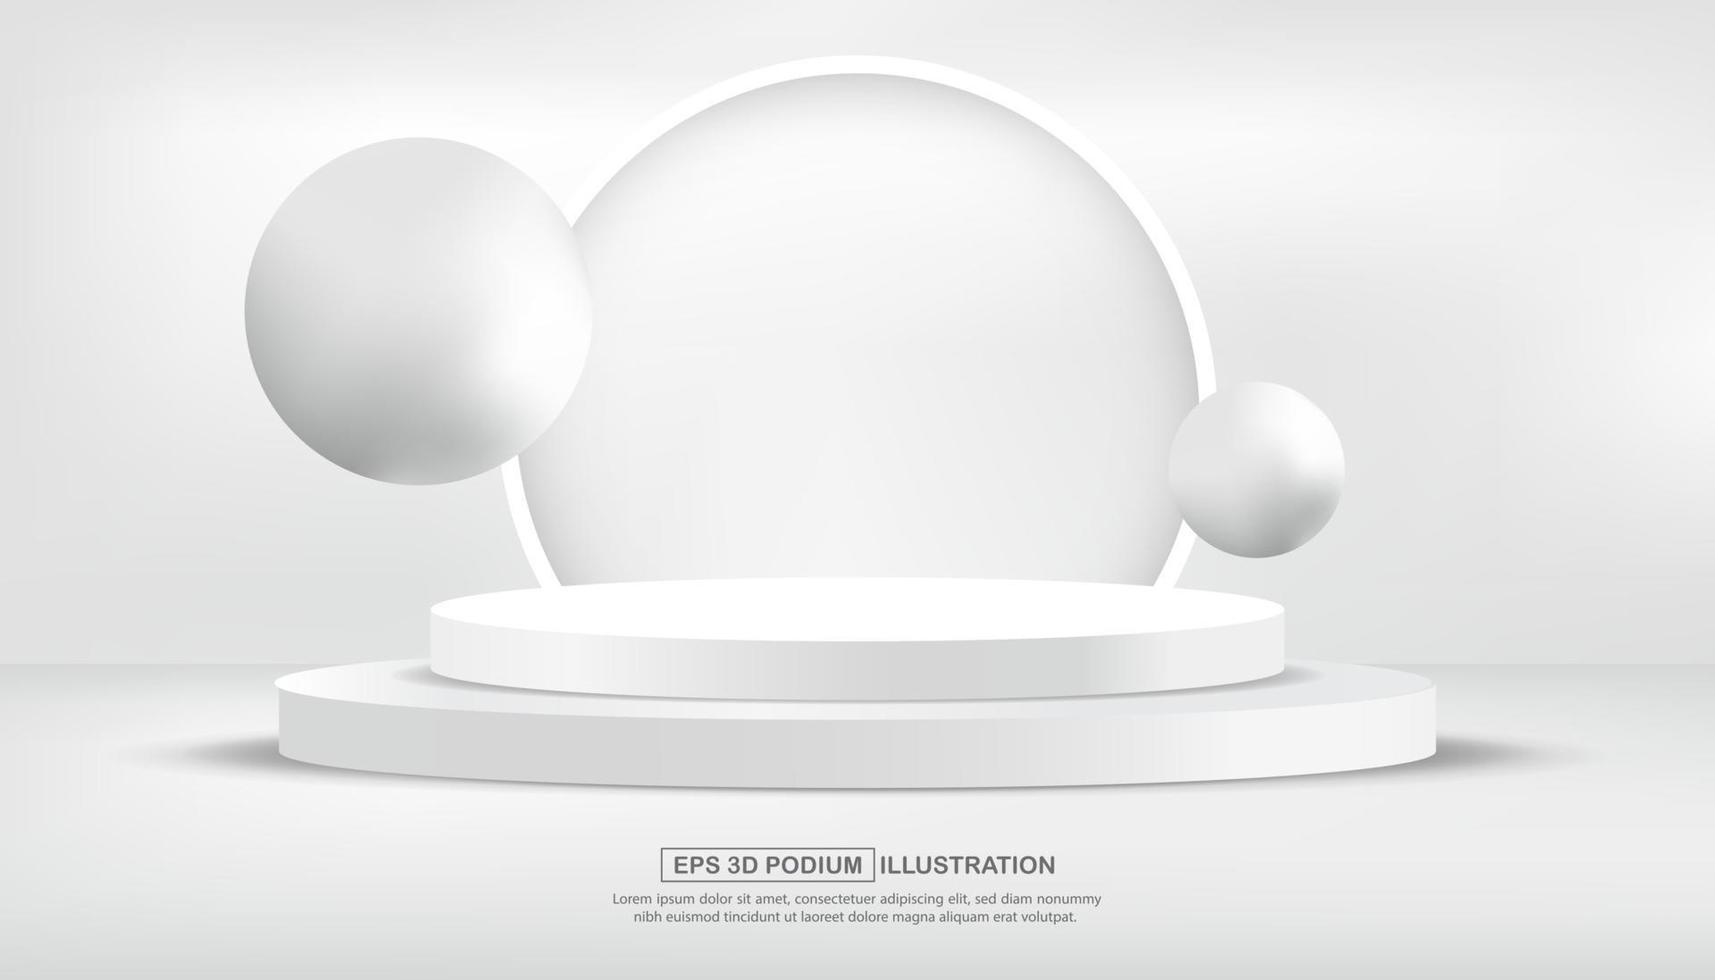 Realistic 3d white podium stand background vector